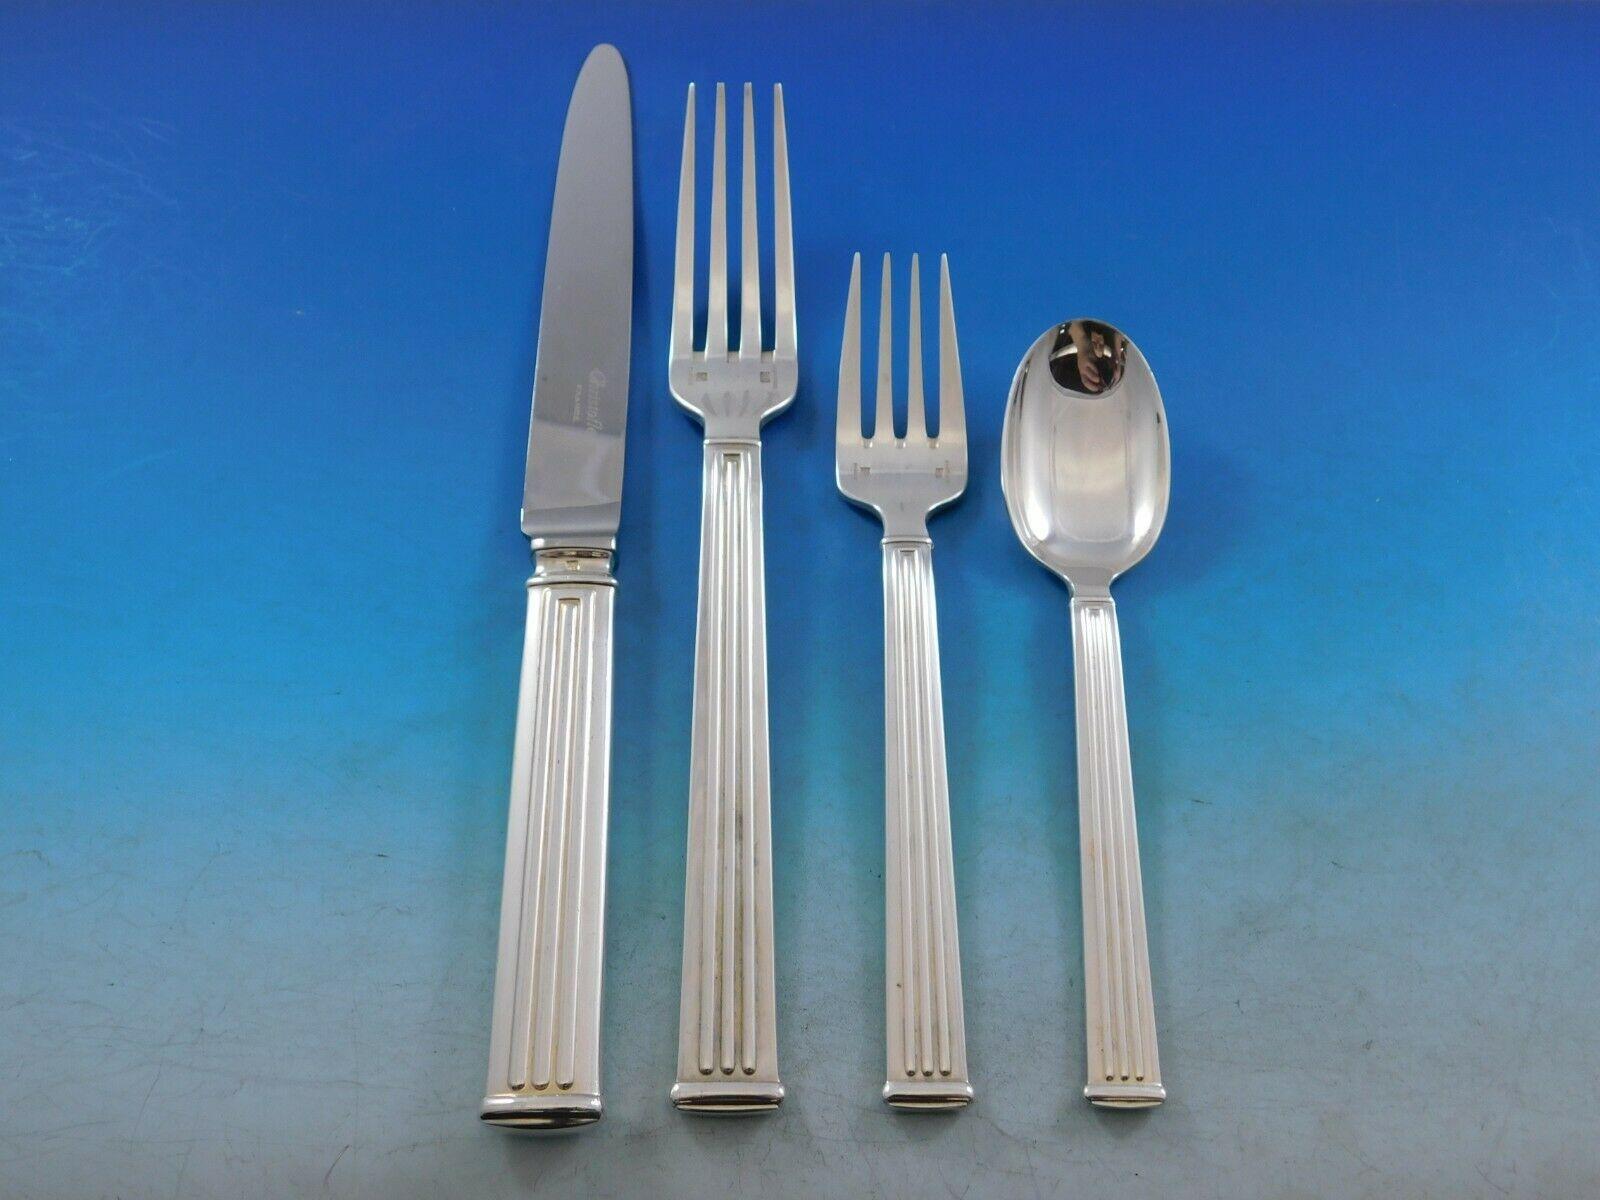 Modern clean lines in a Classic column motif makes this pattern, Triade, forever timeless. 
Desirable Dinner Size Triade by Christofle France Silverplated Flatware set - 41 pieces. This set includes:

8 Dinner Knives, 9 3/4